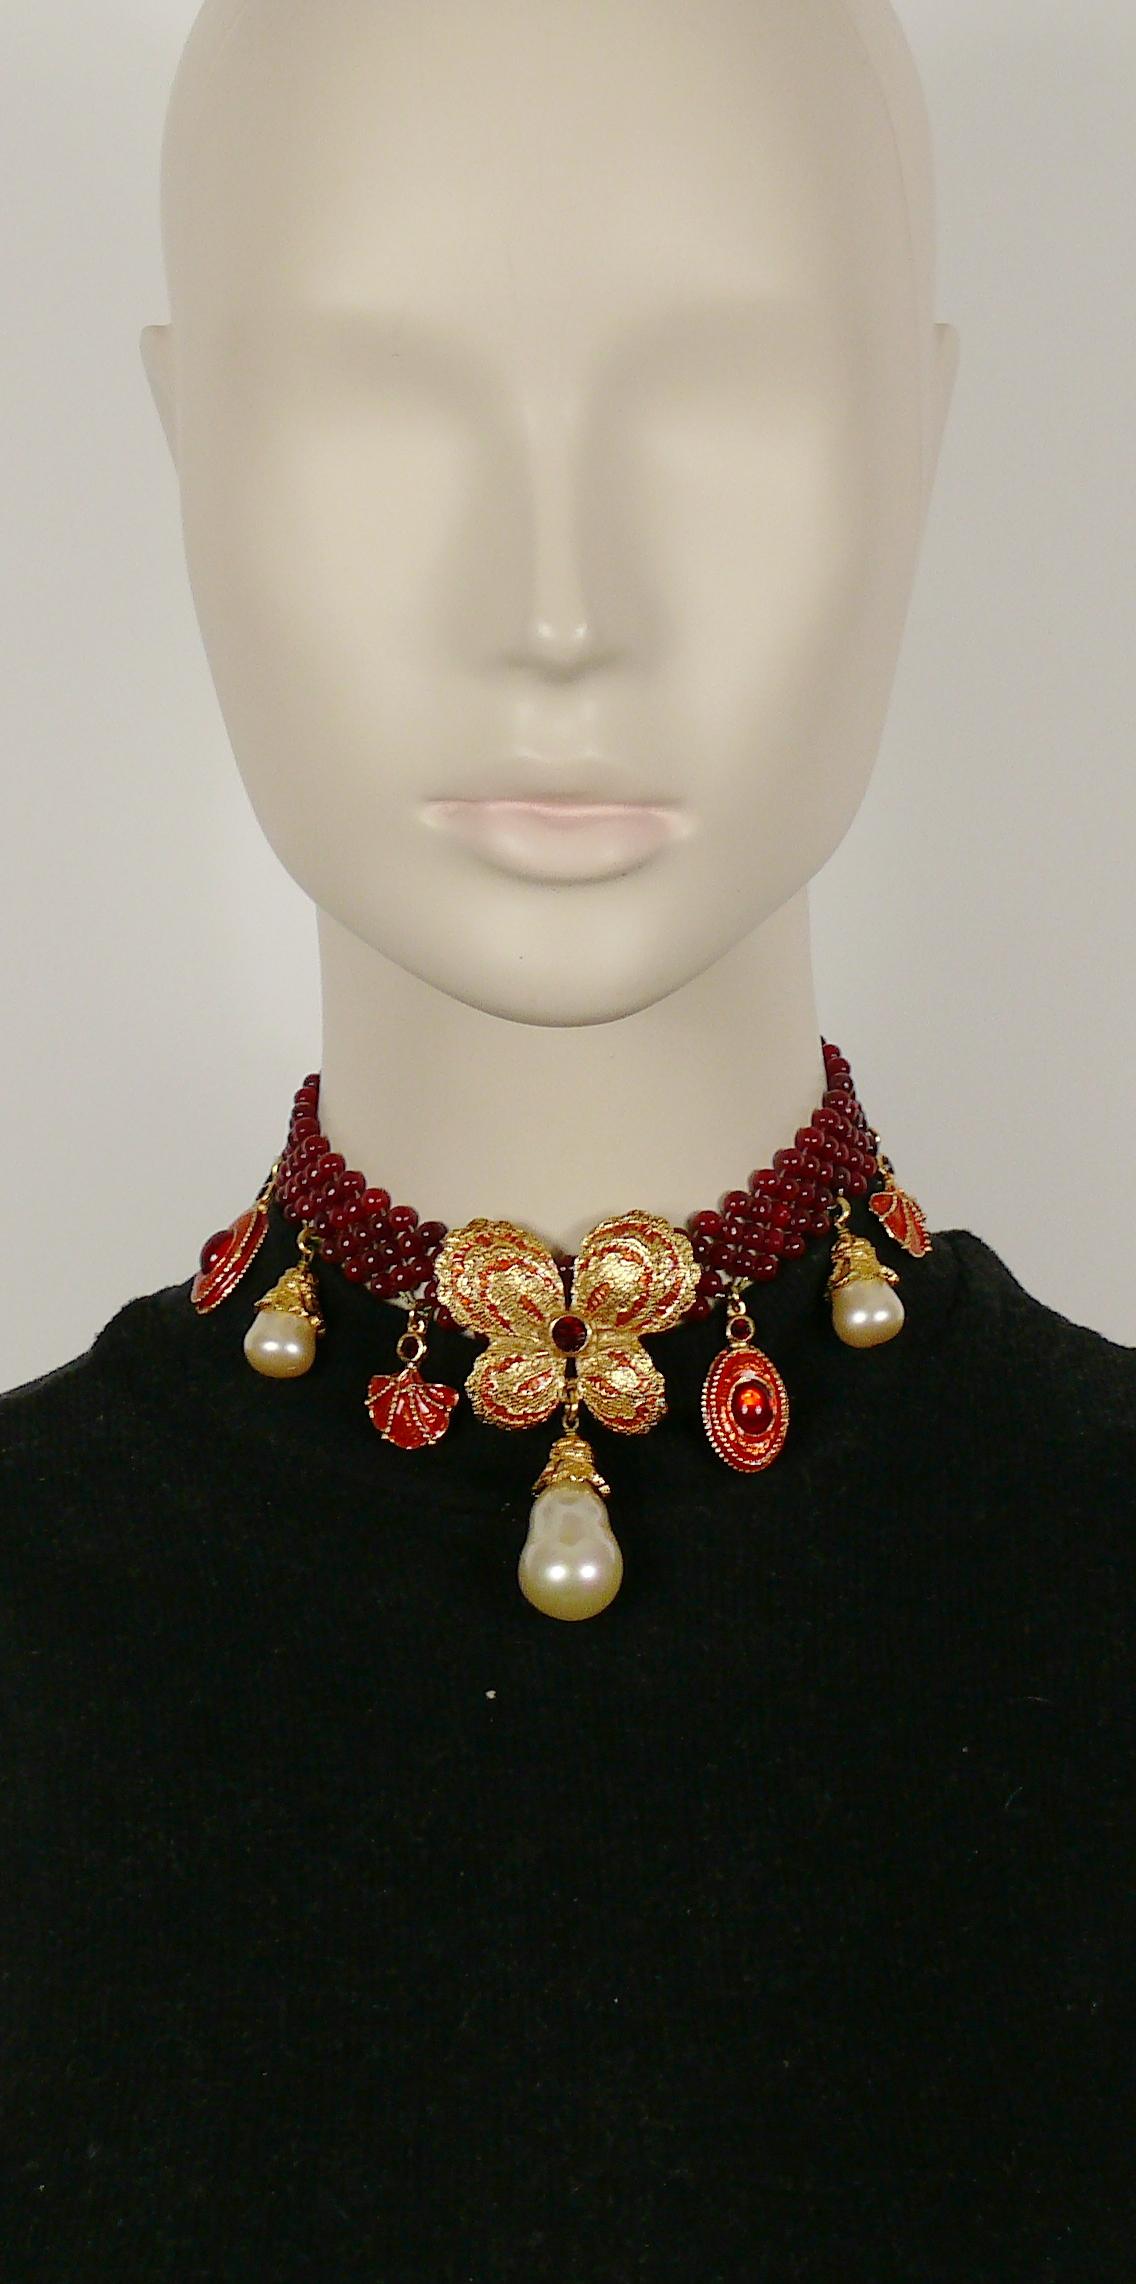 YVES SAINT LAURENT vintage ruby red glass bead choker necklace featuring a massive enameled butterfly center, charms, faux pearl drops, glass cabochons and crystal embellishement.

Adjustable hook clasp closure.

Embossed YVES SAINT LAURENT RIVE